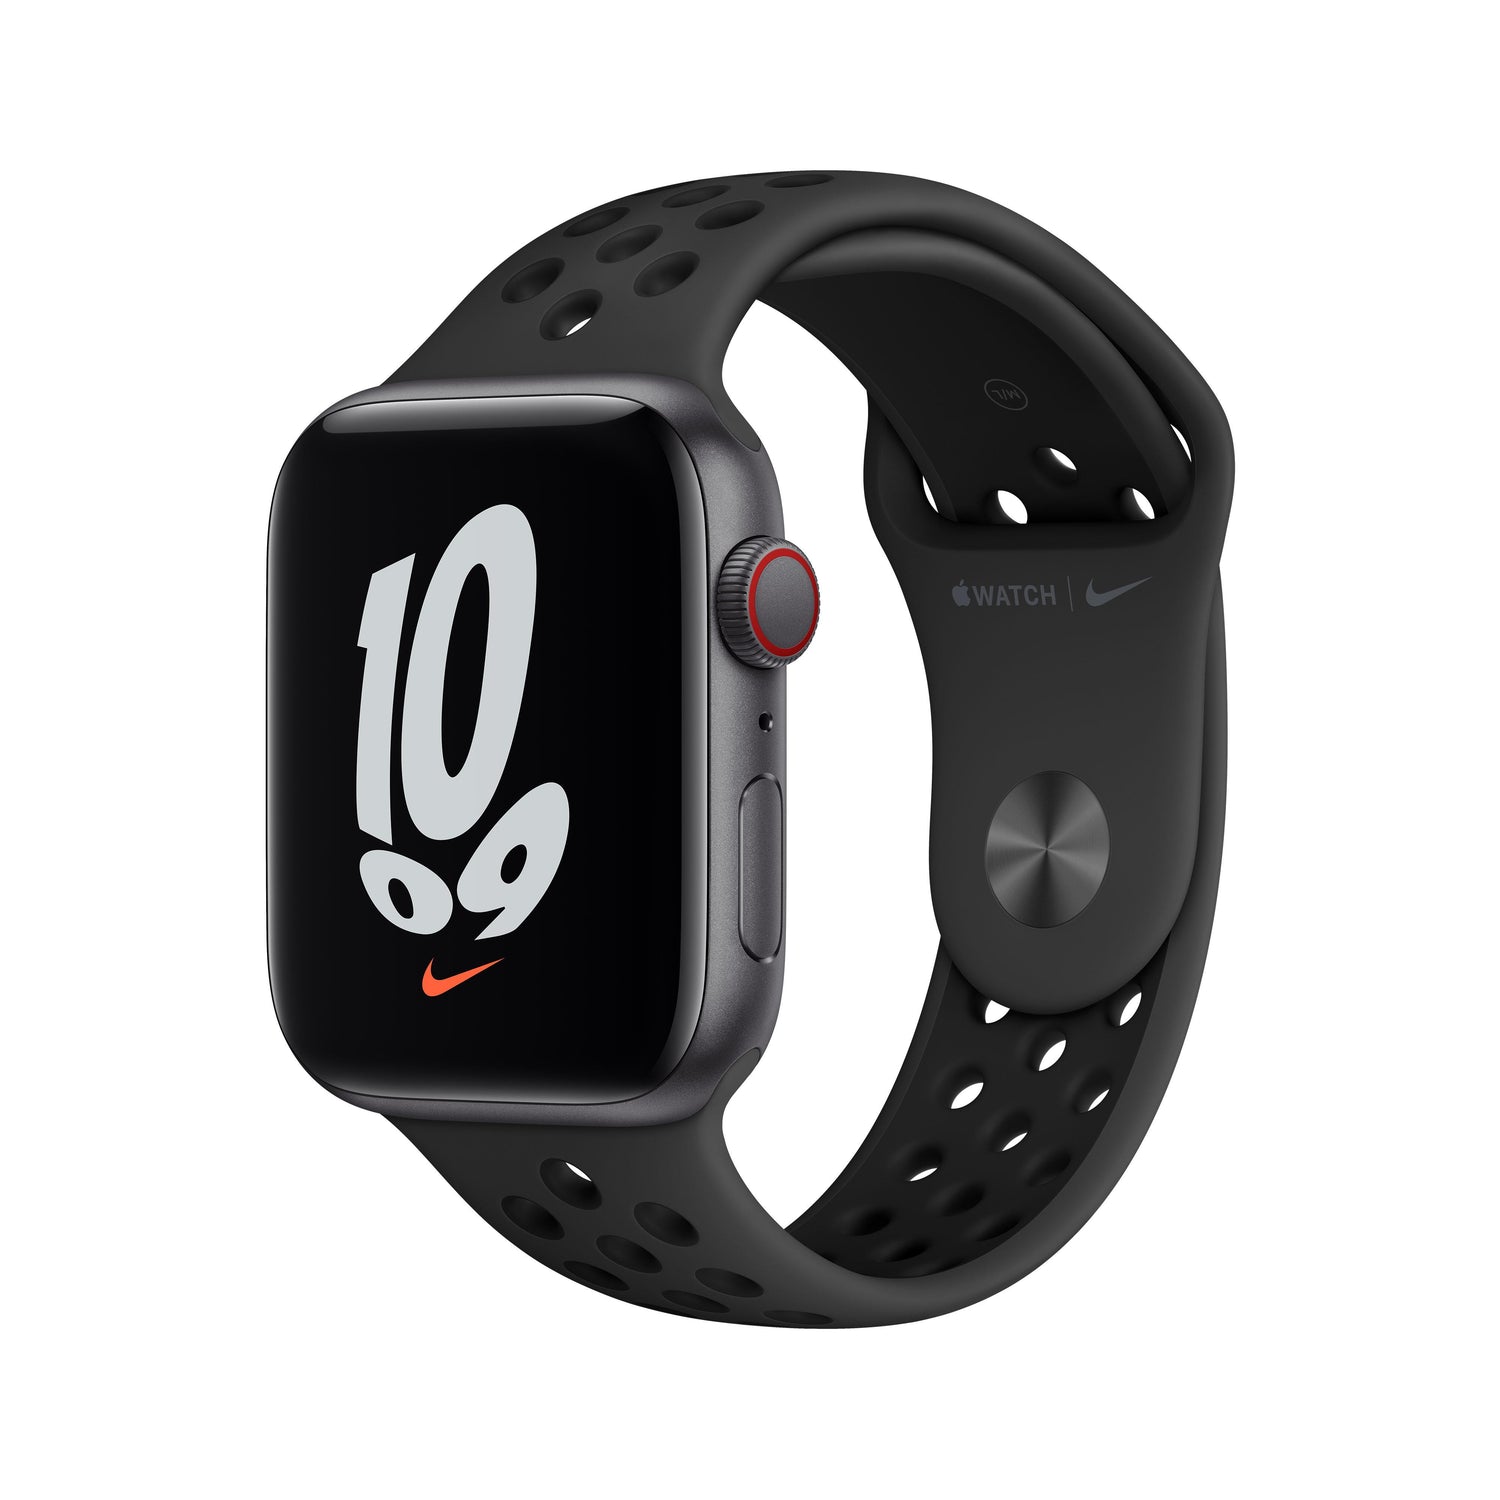 Apple Watch Nike SE GPS + Cellular, 44mm Space Grey Aluminium Case with Anthracite/Black Nike Sport Band - Regular